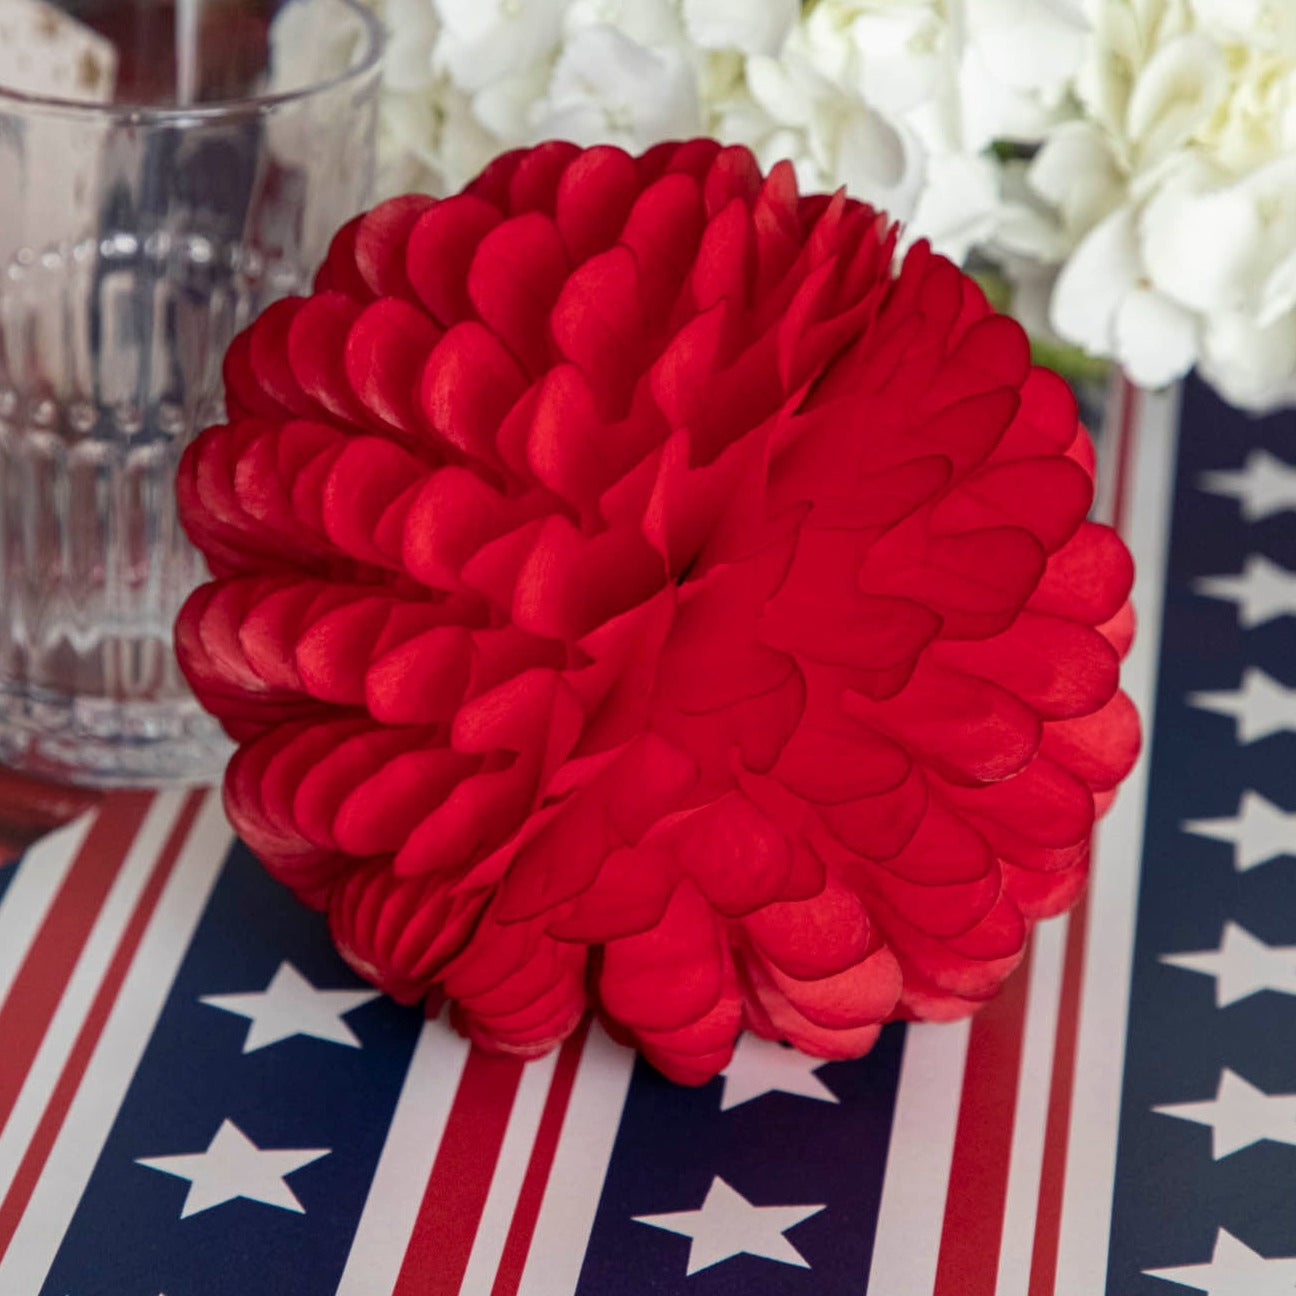 The Stars and Stripes Runner under a patriotic tablescape.